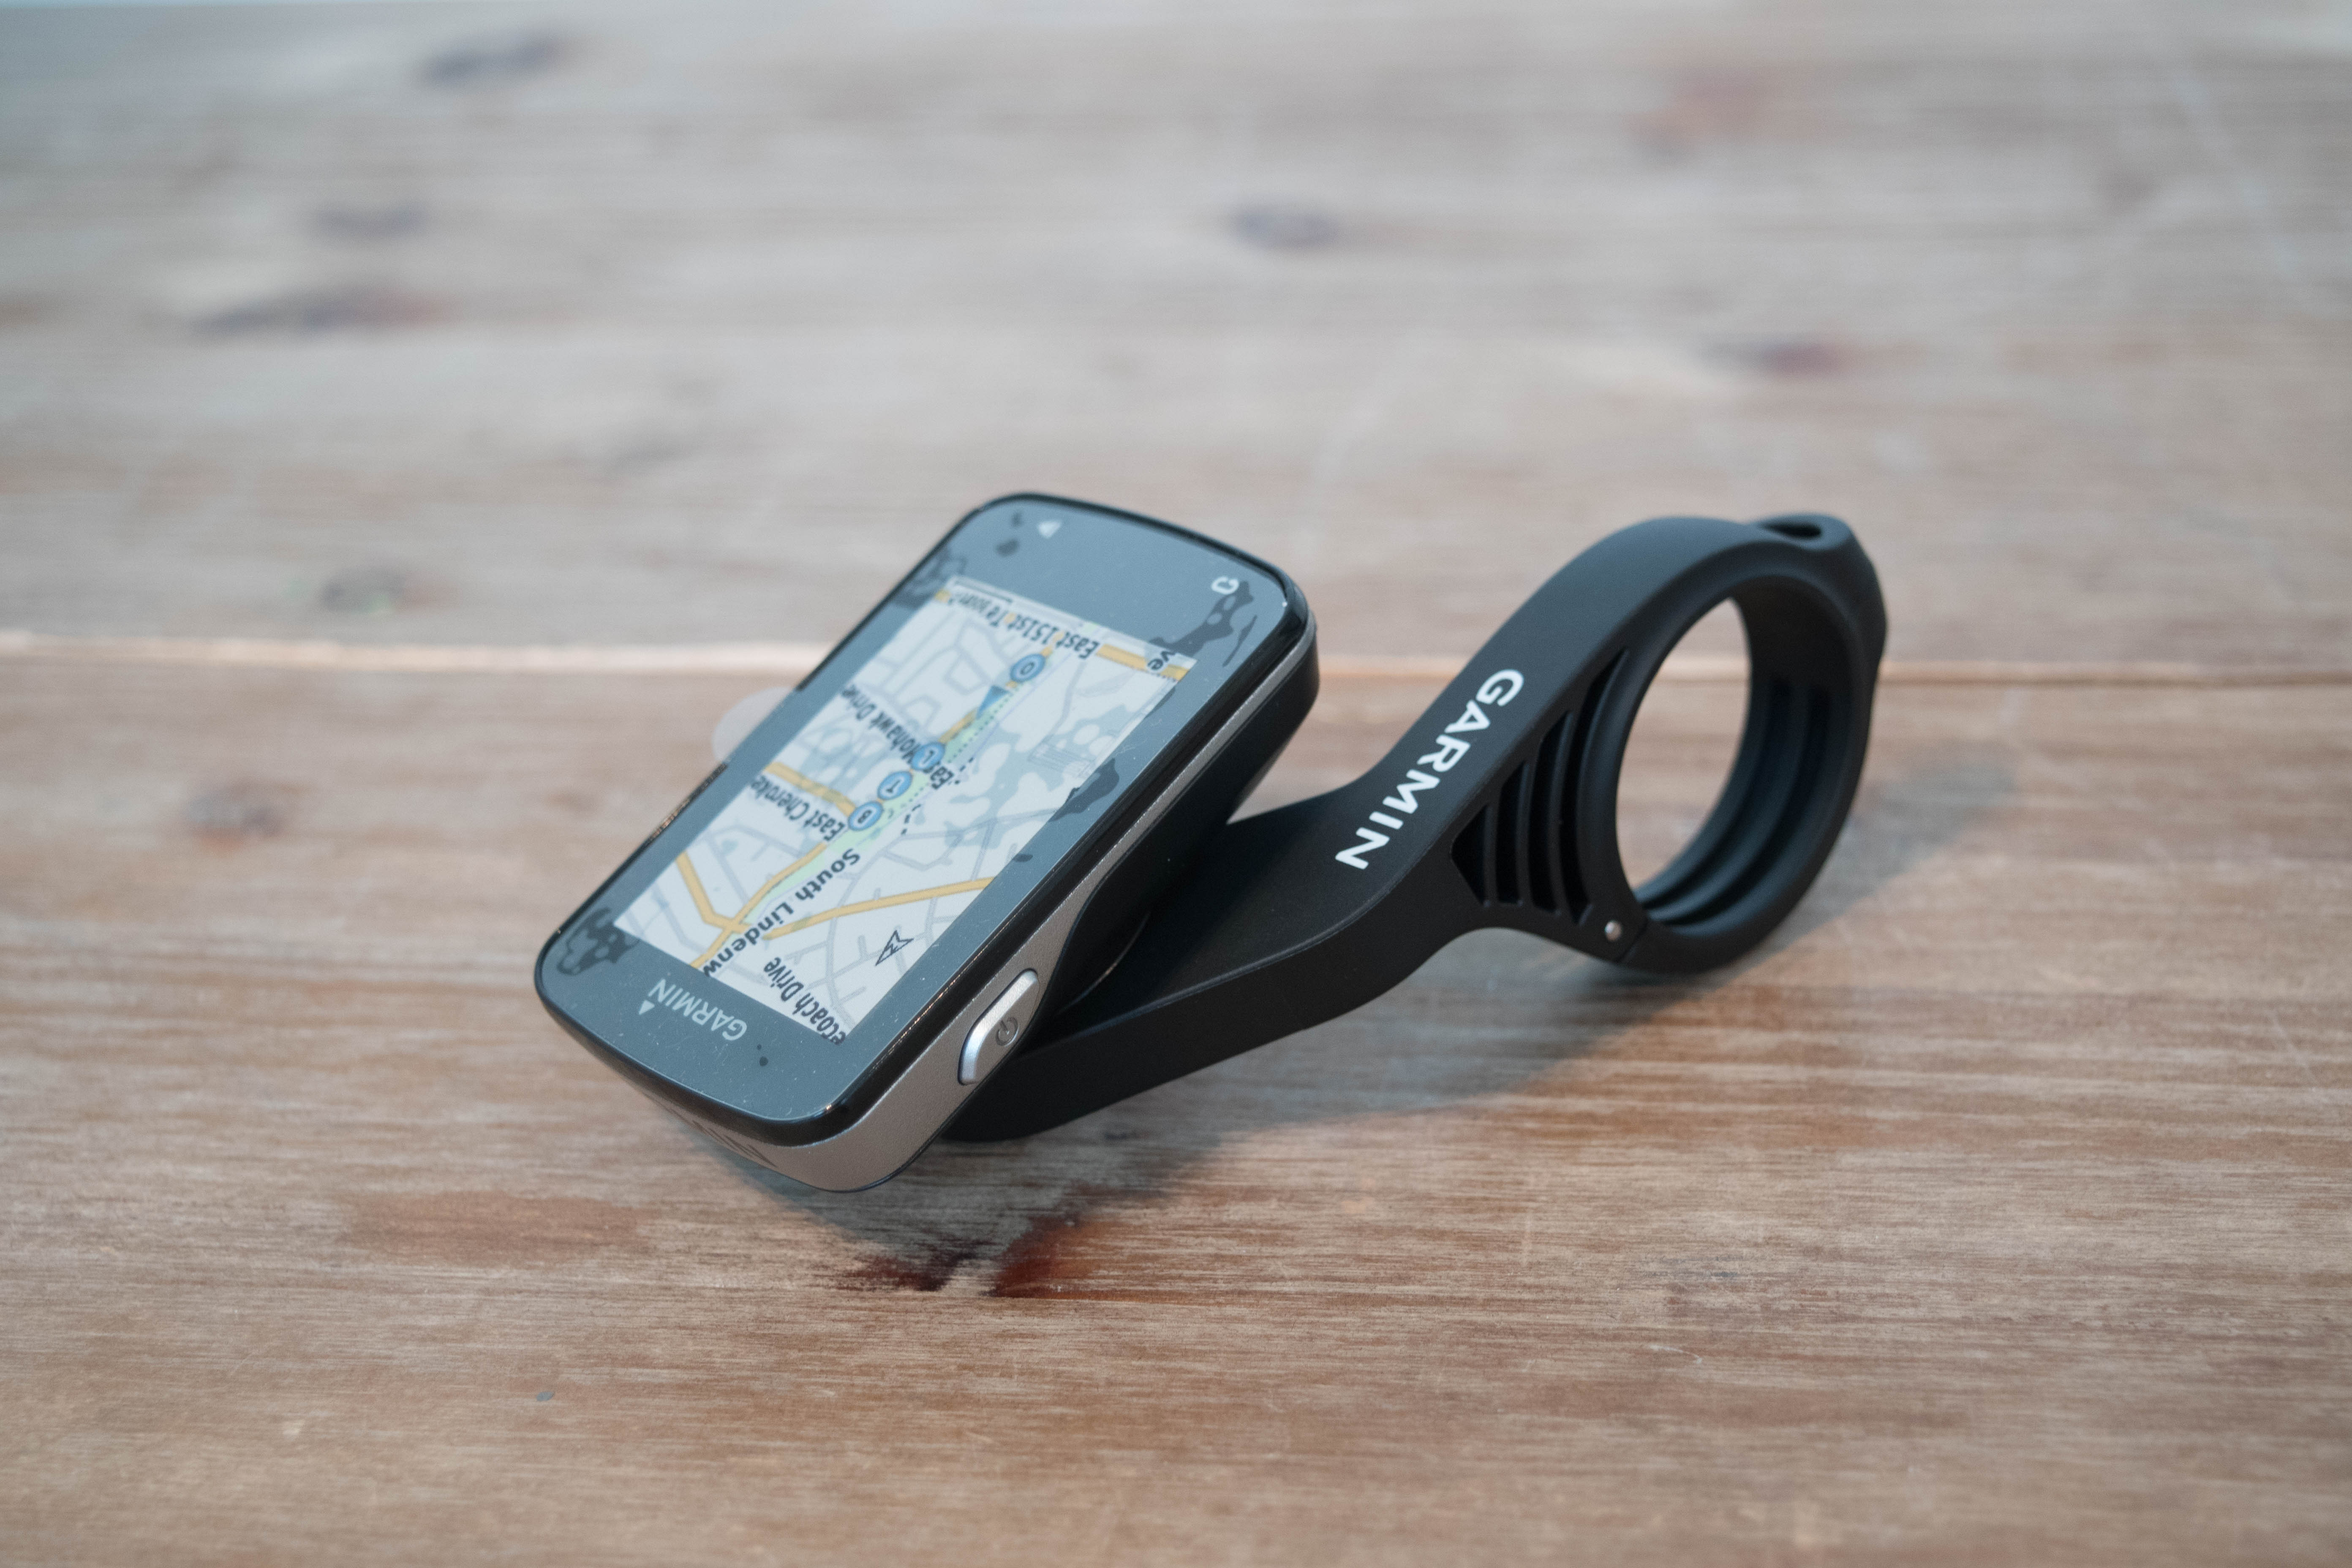 Hands-on with Garmin's new Edge 820 with mapping